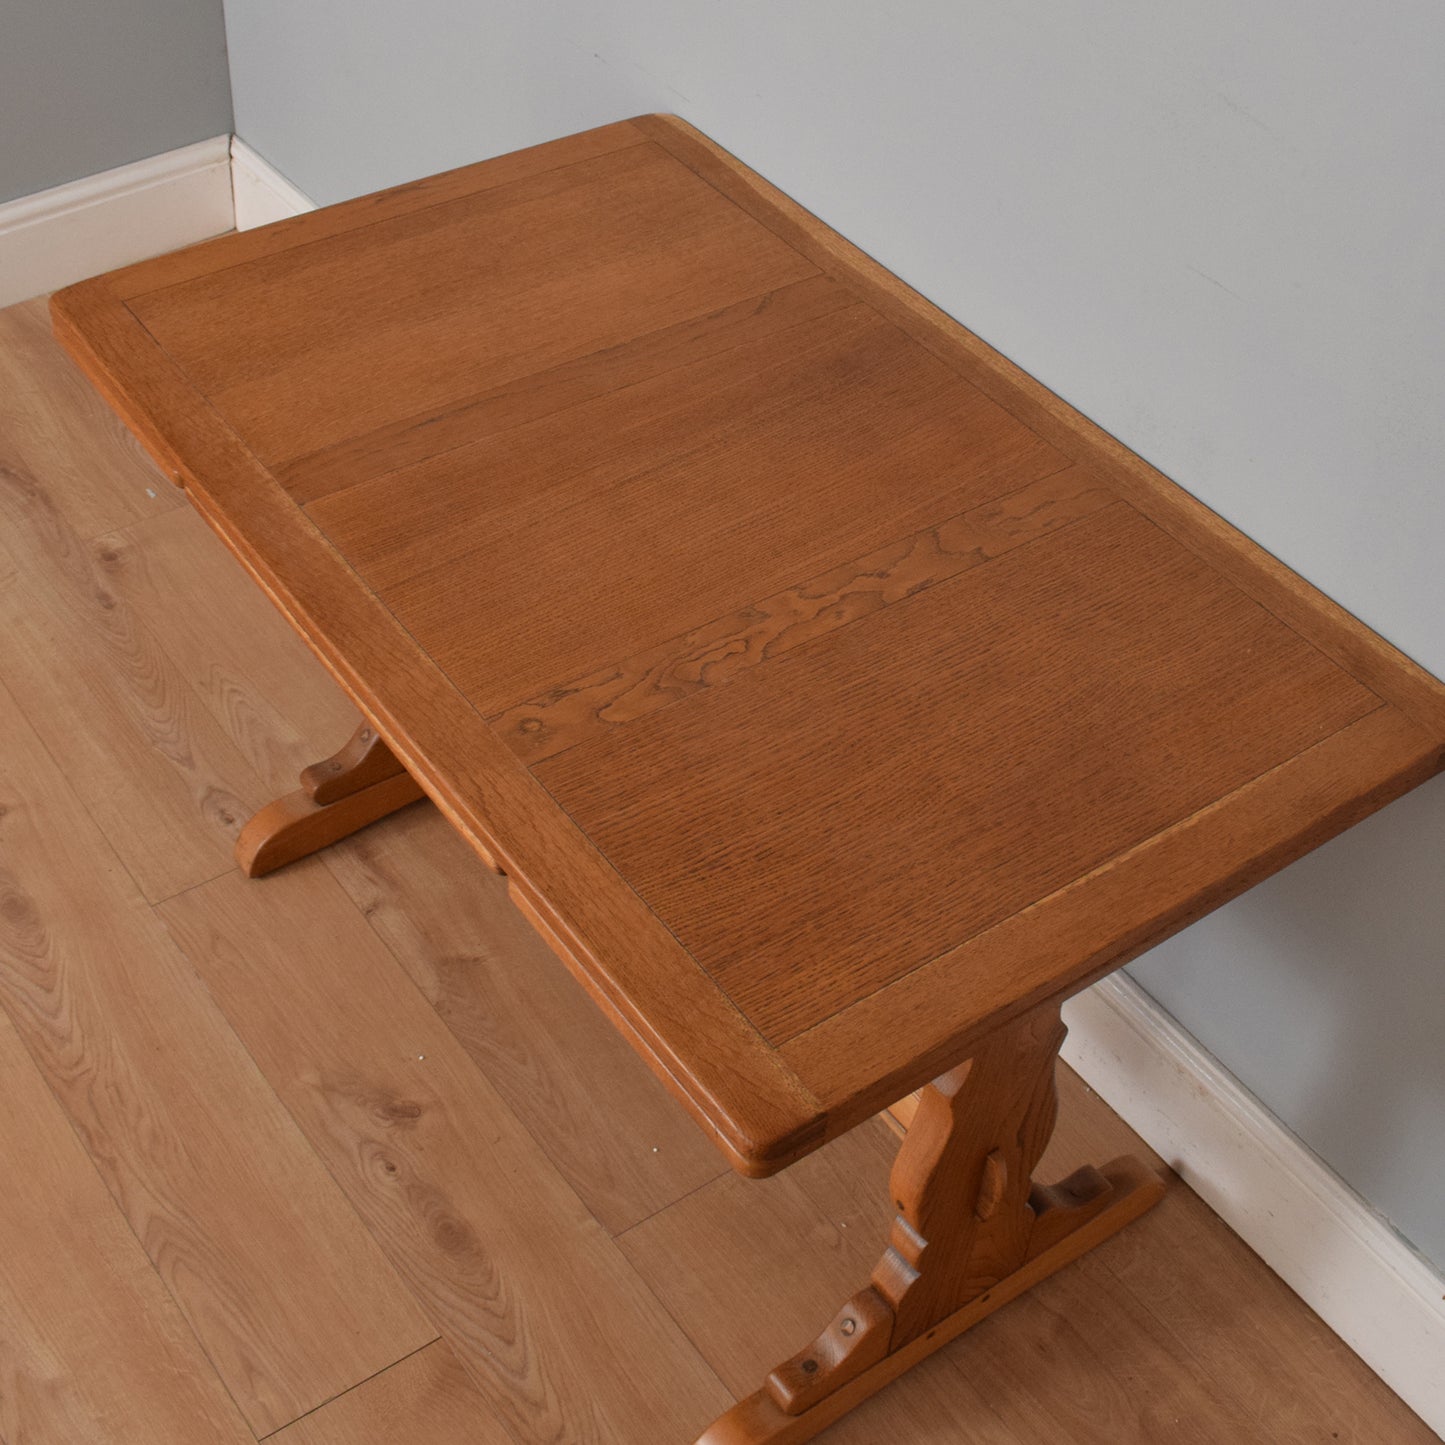 Ercol Draw Leaf Table and Four